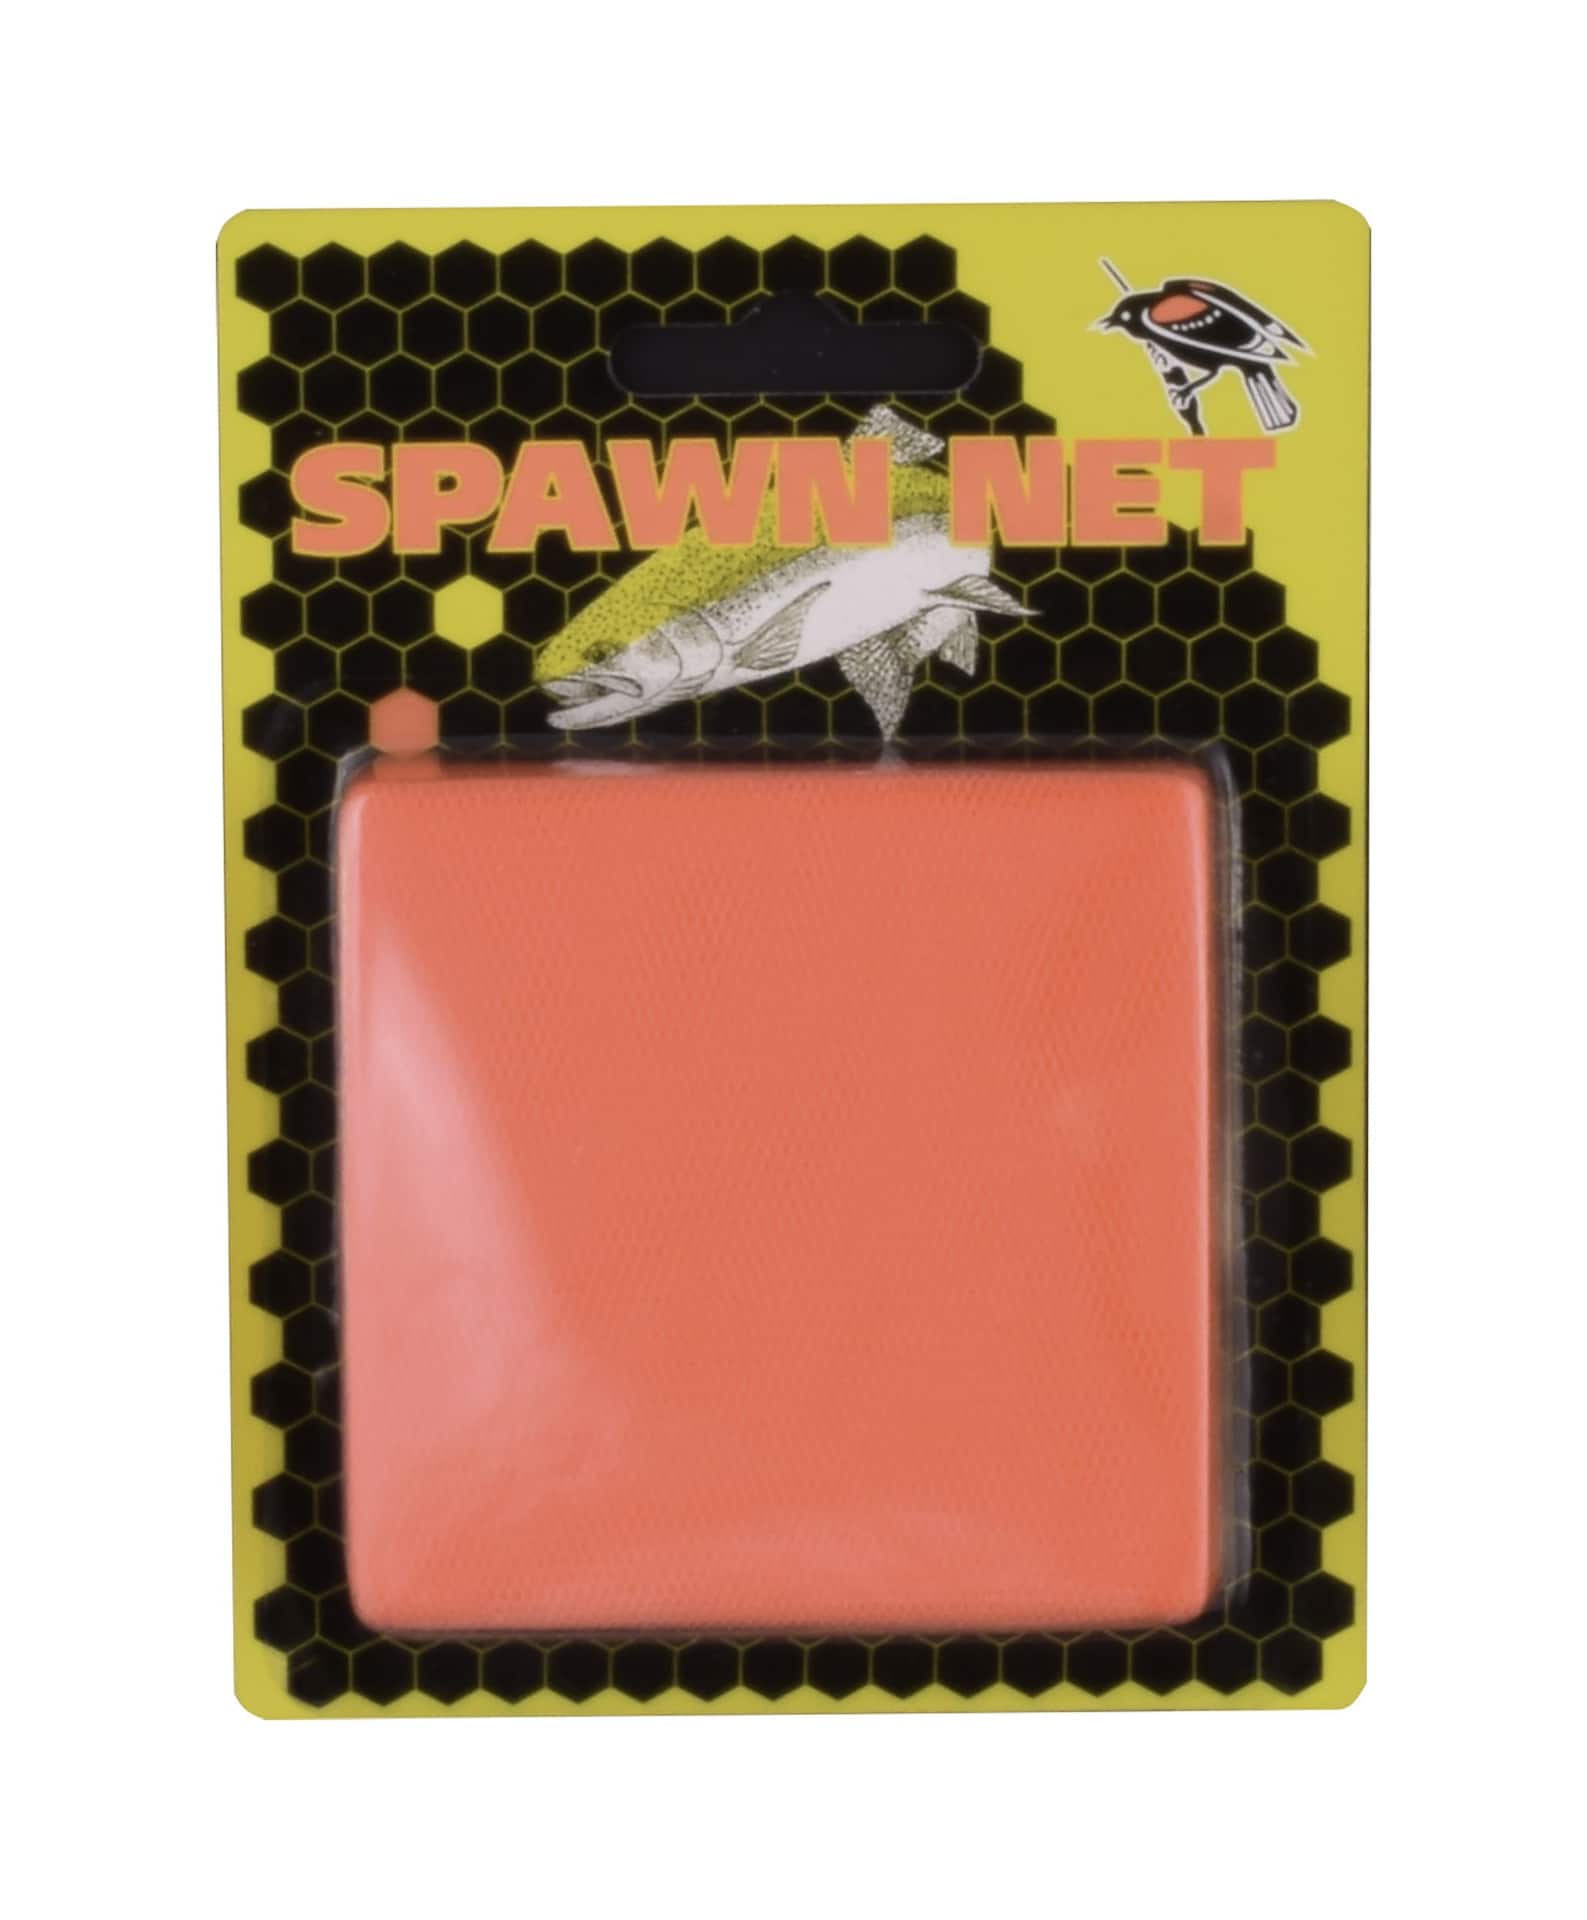 Redwing Tackle Spawn Net – Natural Sports - The Fishing Store